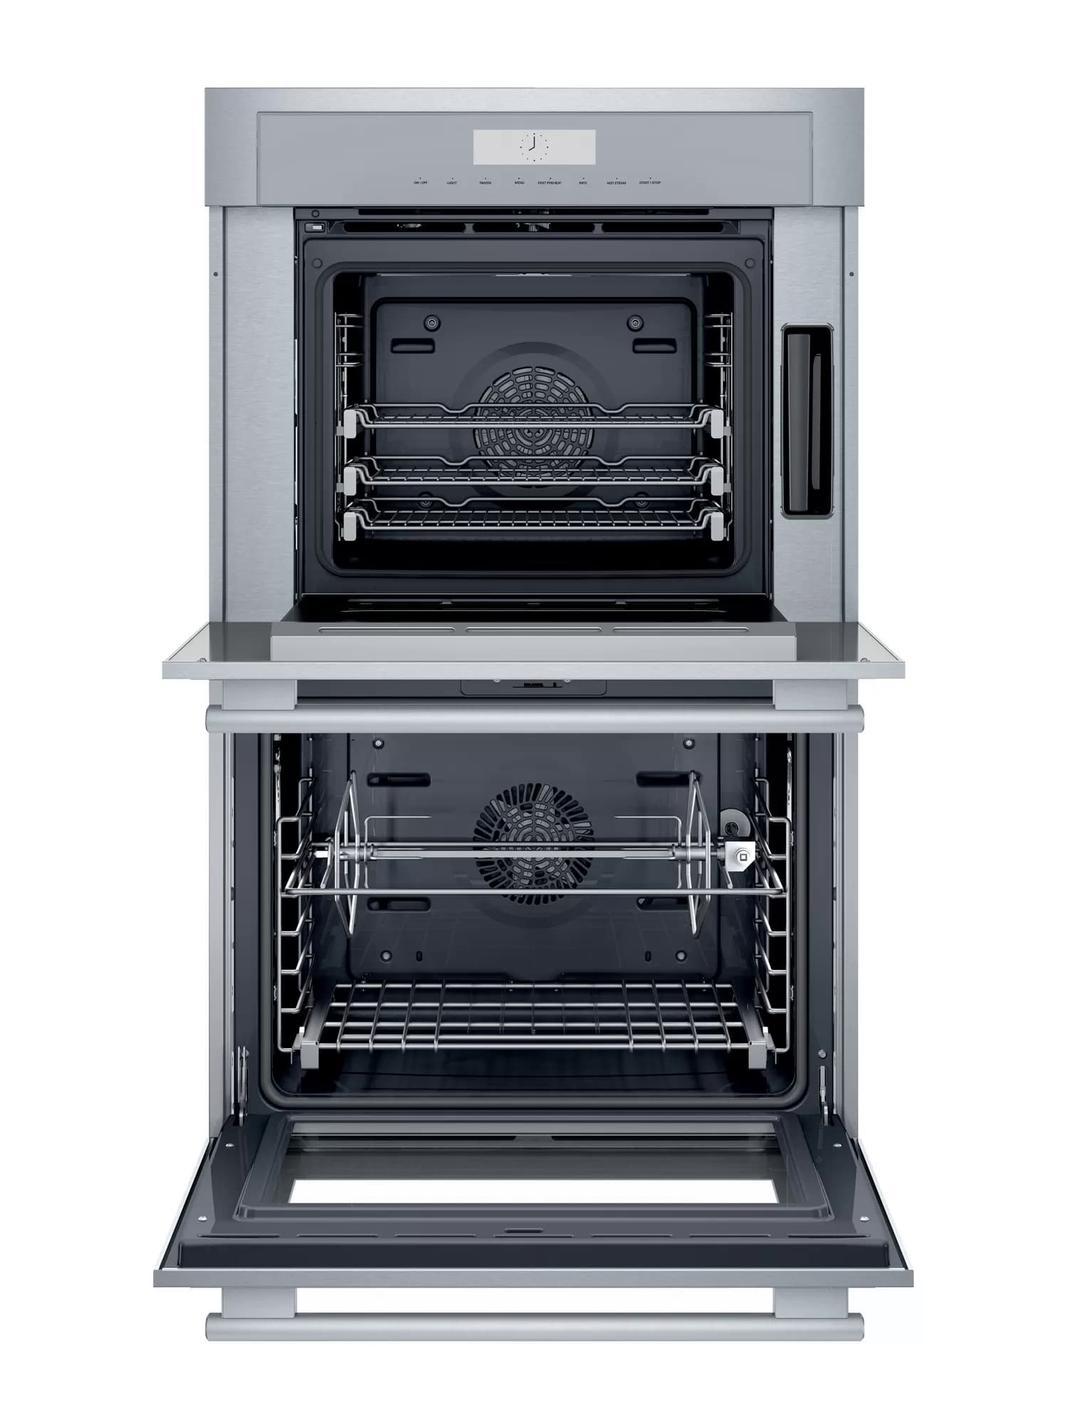 Thermador - 7.3 cu. ft Double Wall Oven in Stainless - MEDS302WS